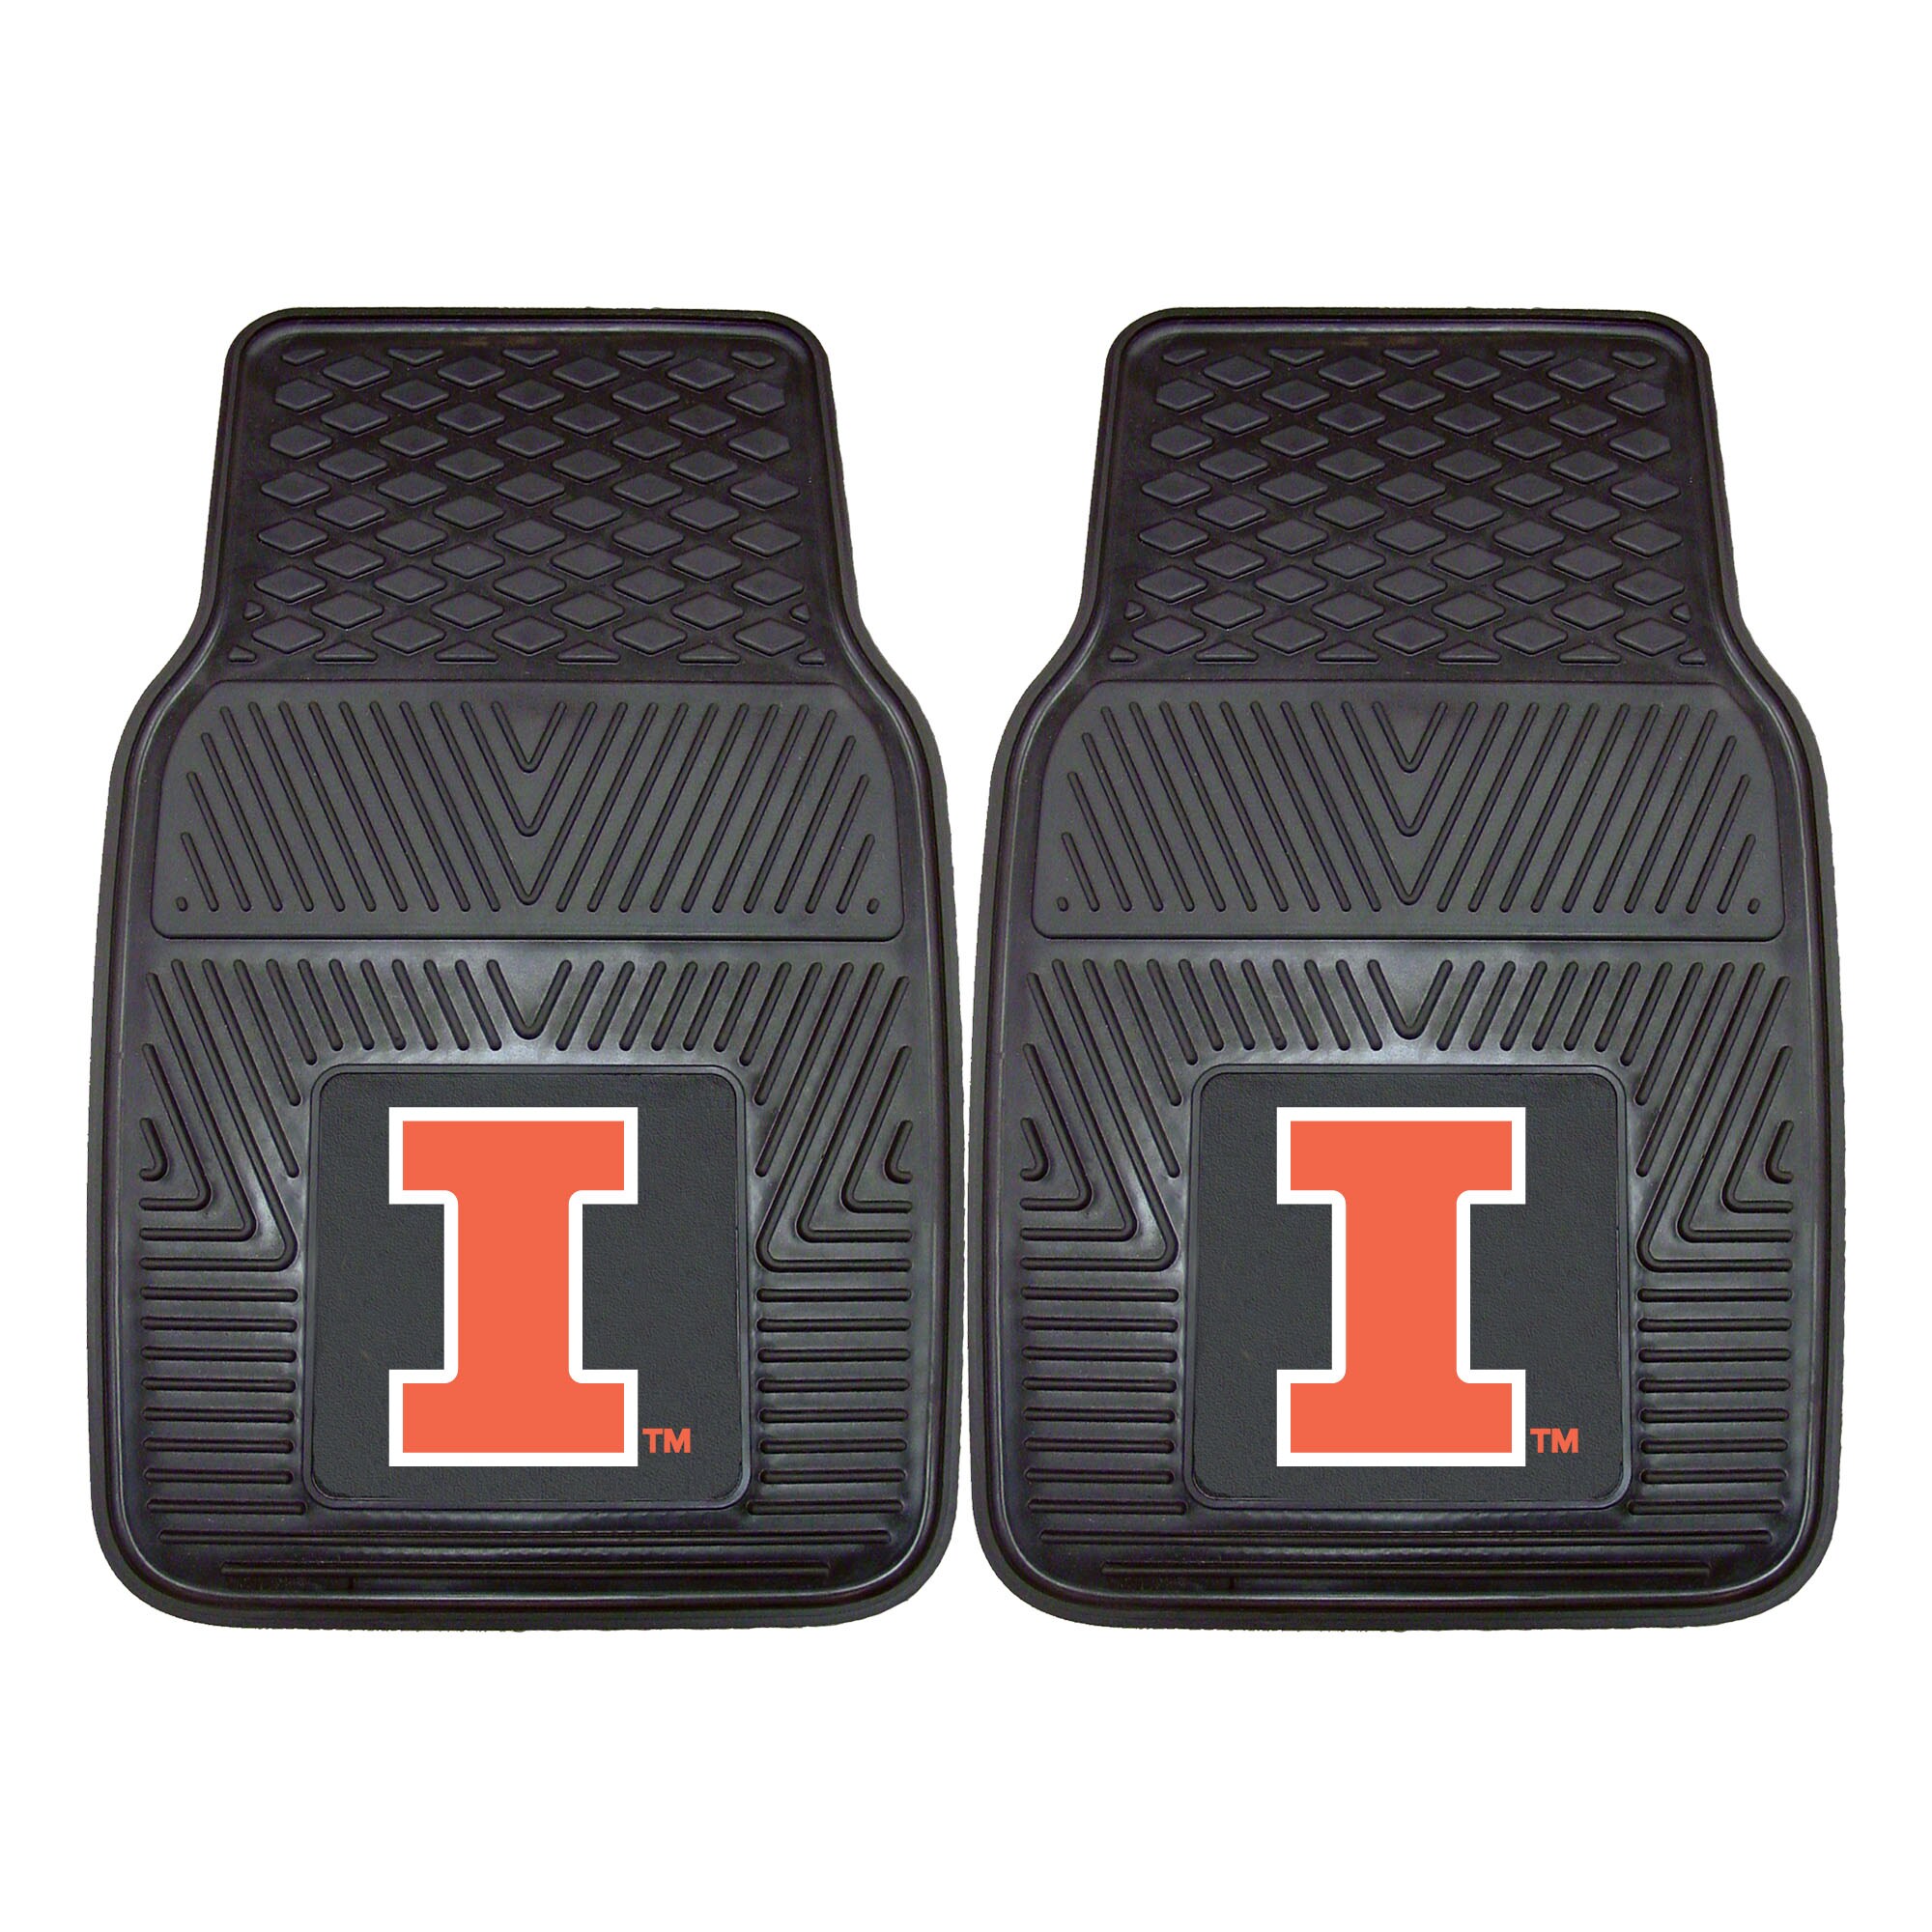 One Sized FANMATS NCAA Illinois Illini Seat Coverseat Cover Team Colors 